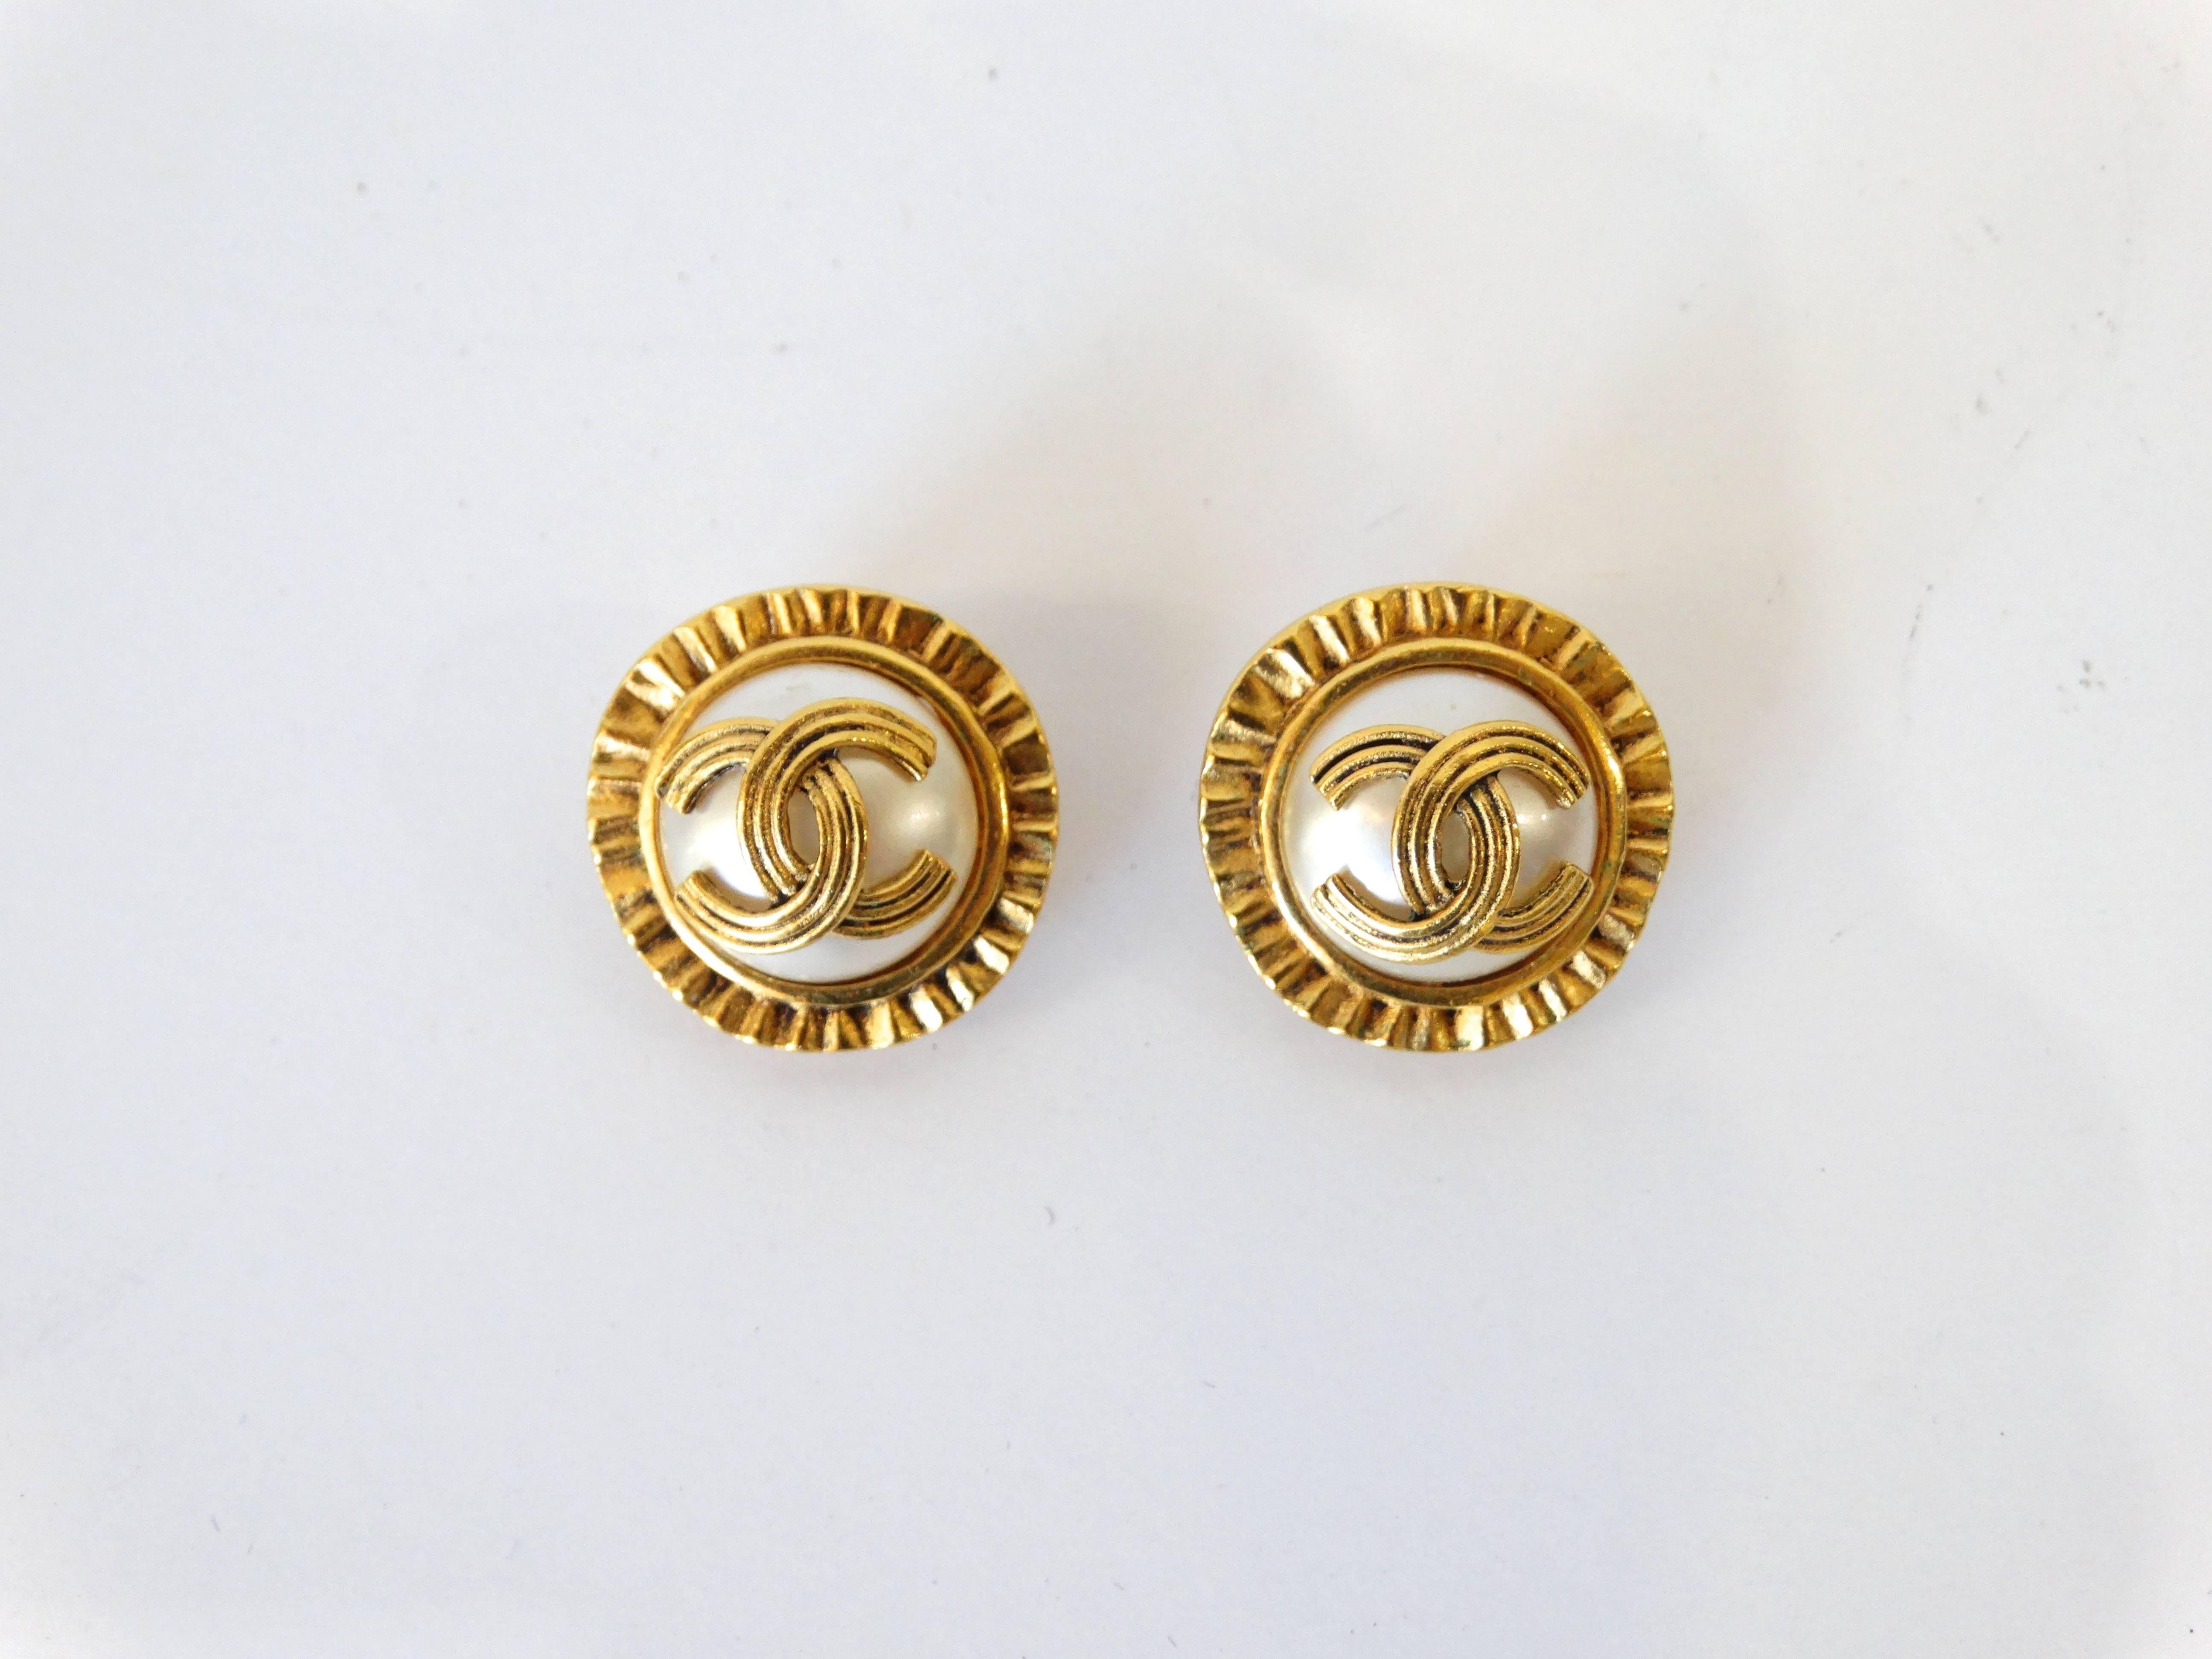 Make a statement in our 1980s earrings from iconic label Chanel! Oversized faux pearls with gold CC logo emblem over top. Trimmed with matching brilliant gold metal edges. Clip on backs. Chanel signed placard on the backs of the earrings. 

About 1”